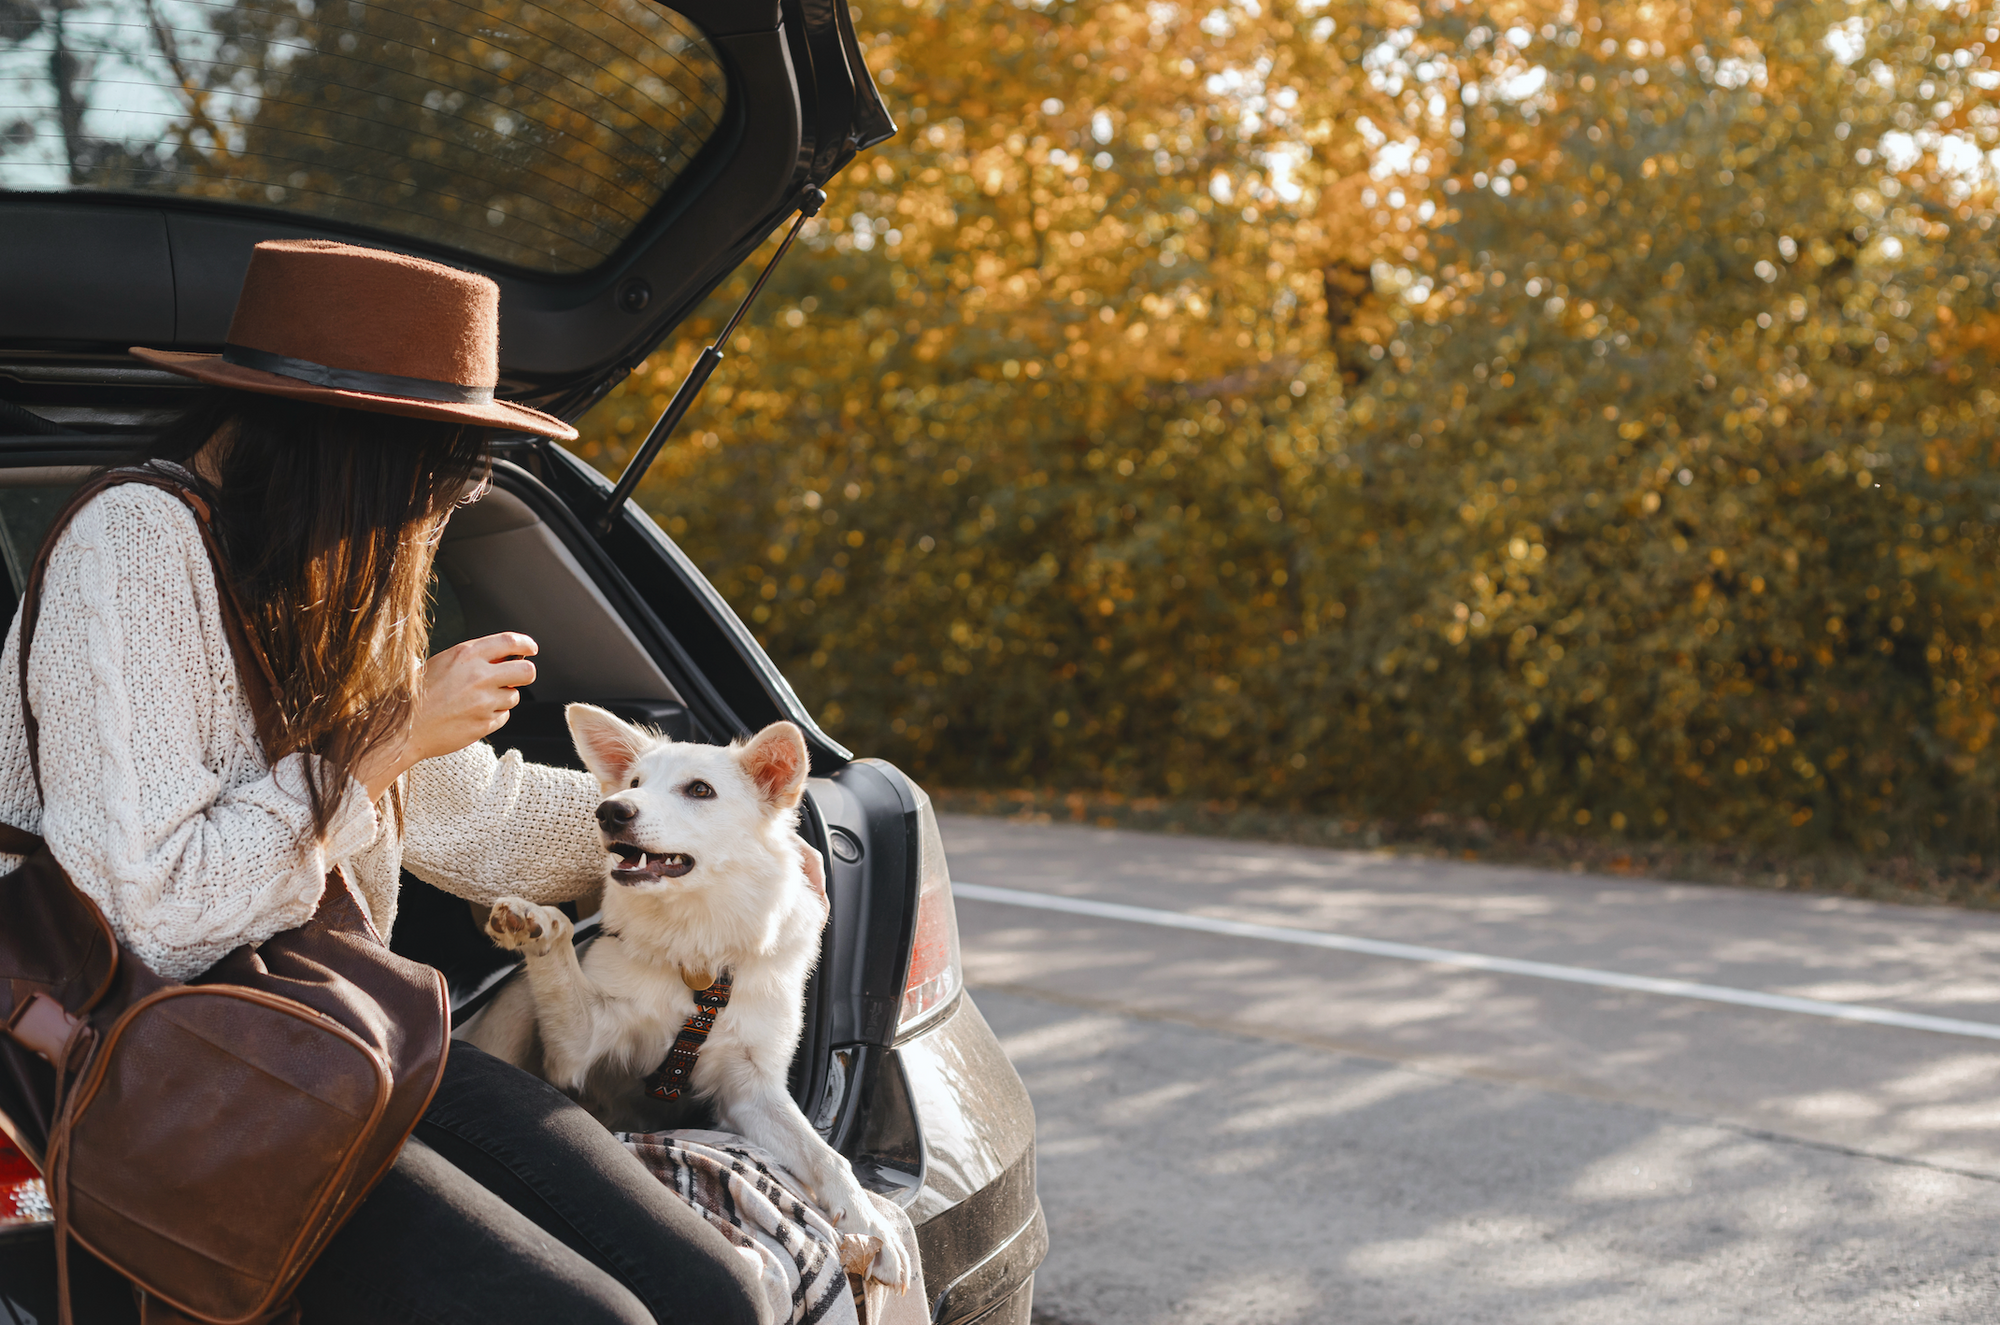 Woman sitting in car with dog in trunk, outdoor scene with trees and road.